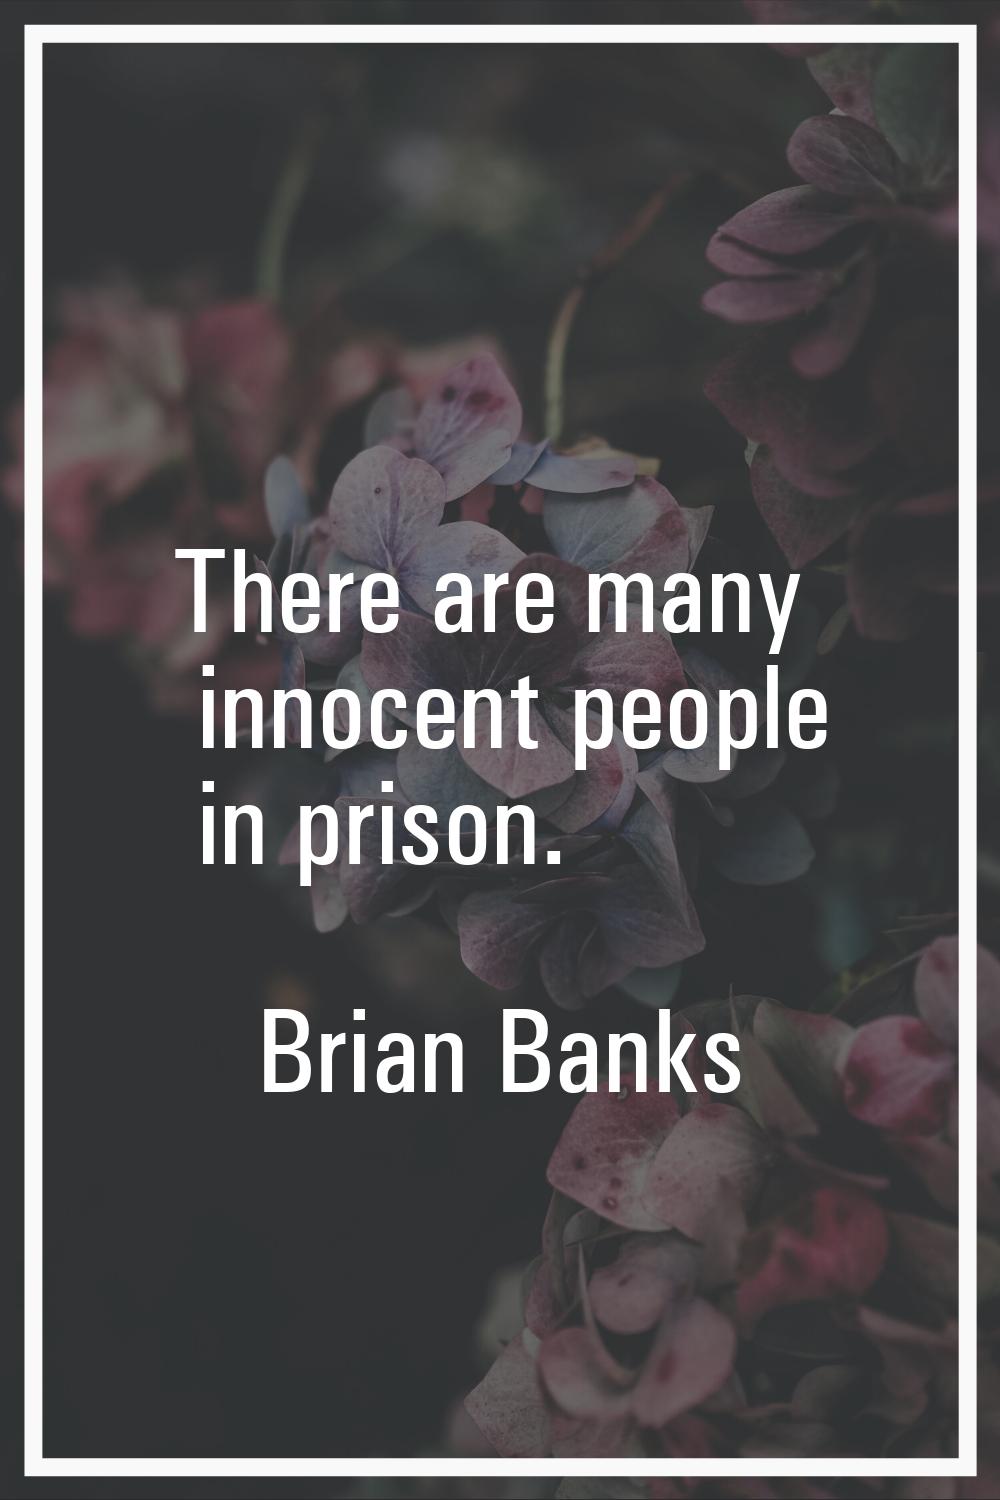 There are many innocent people in prison.